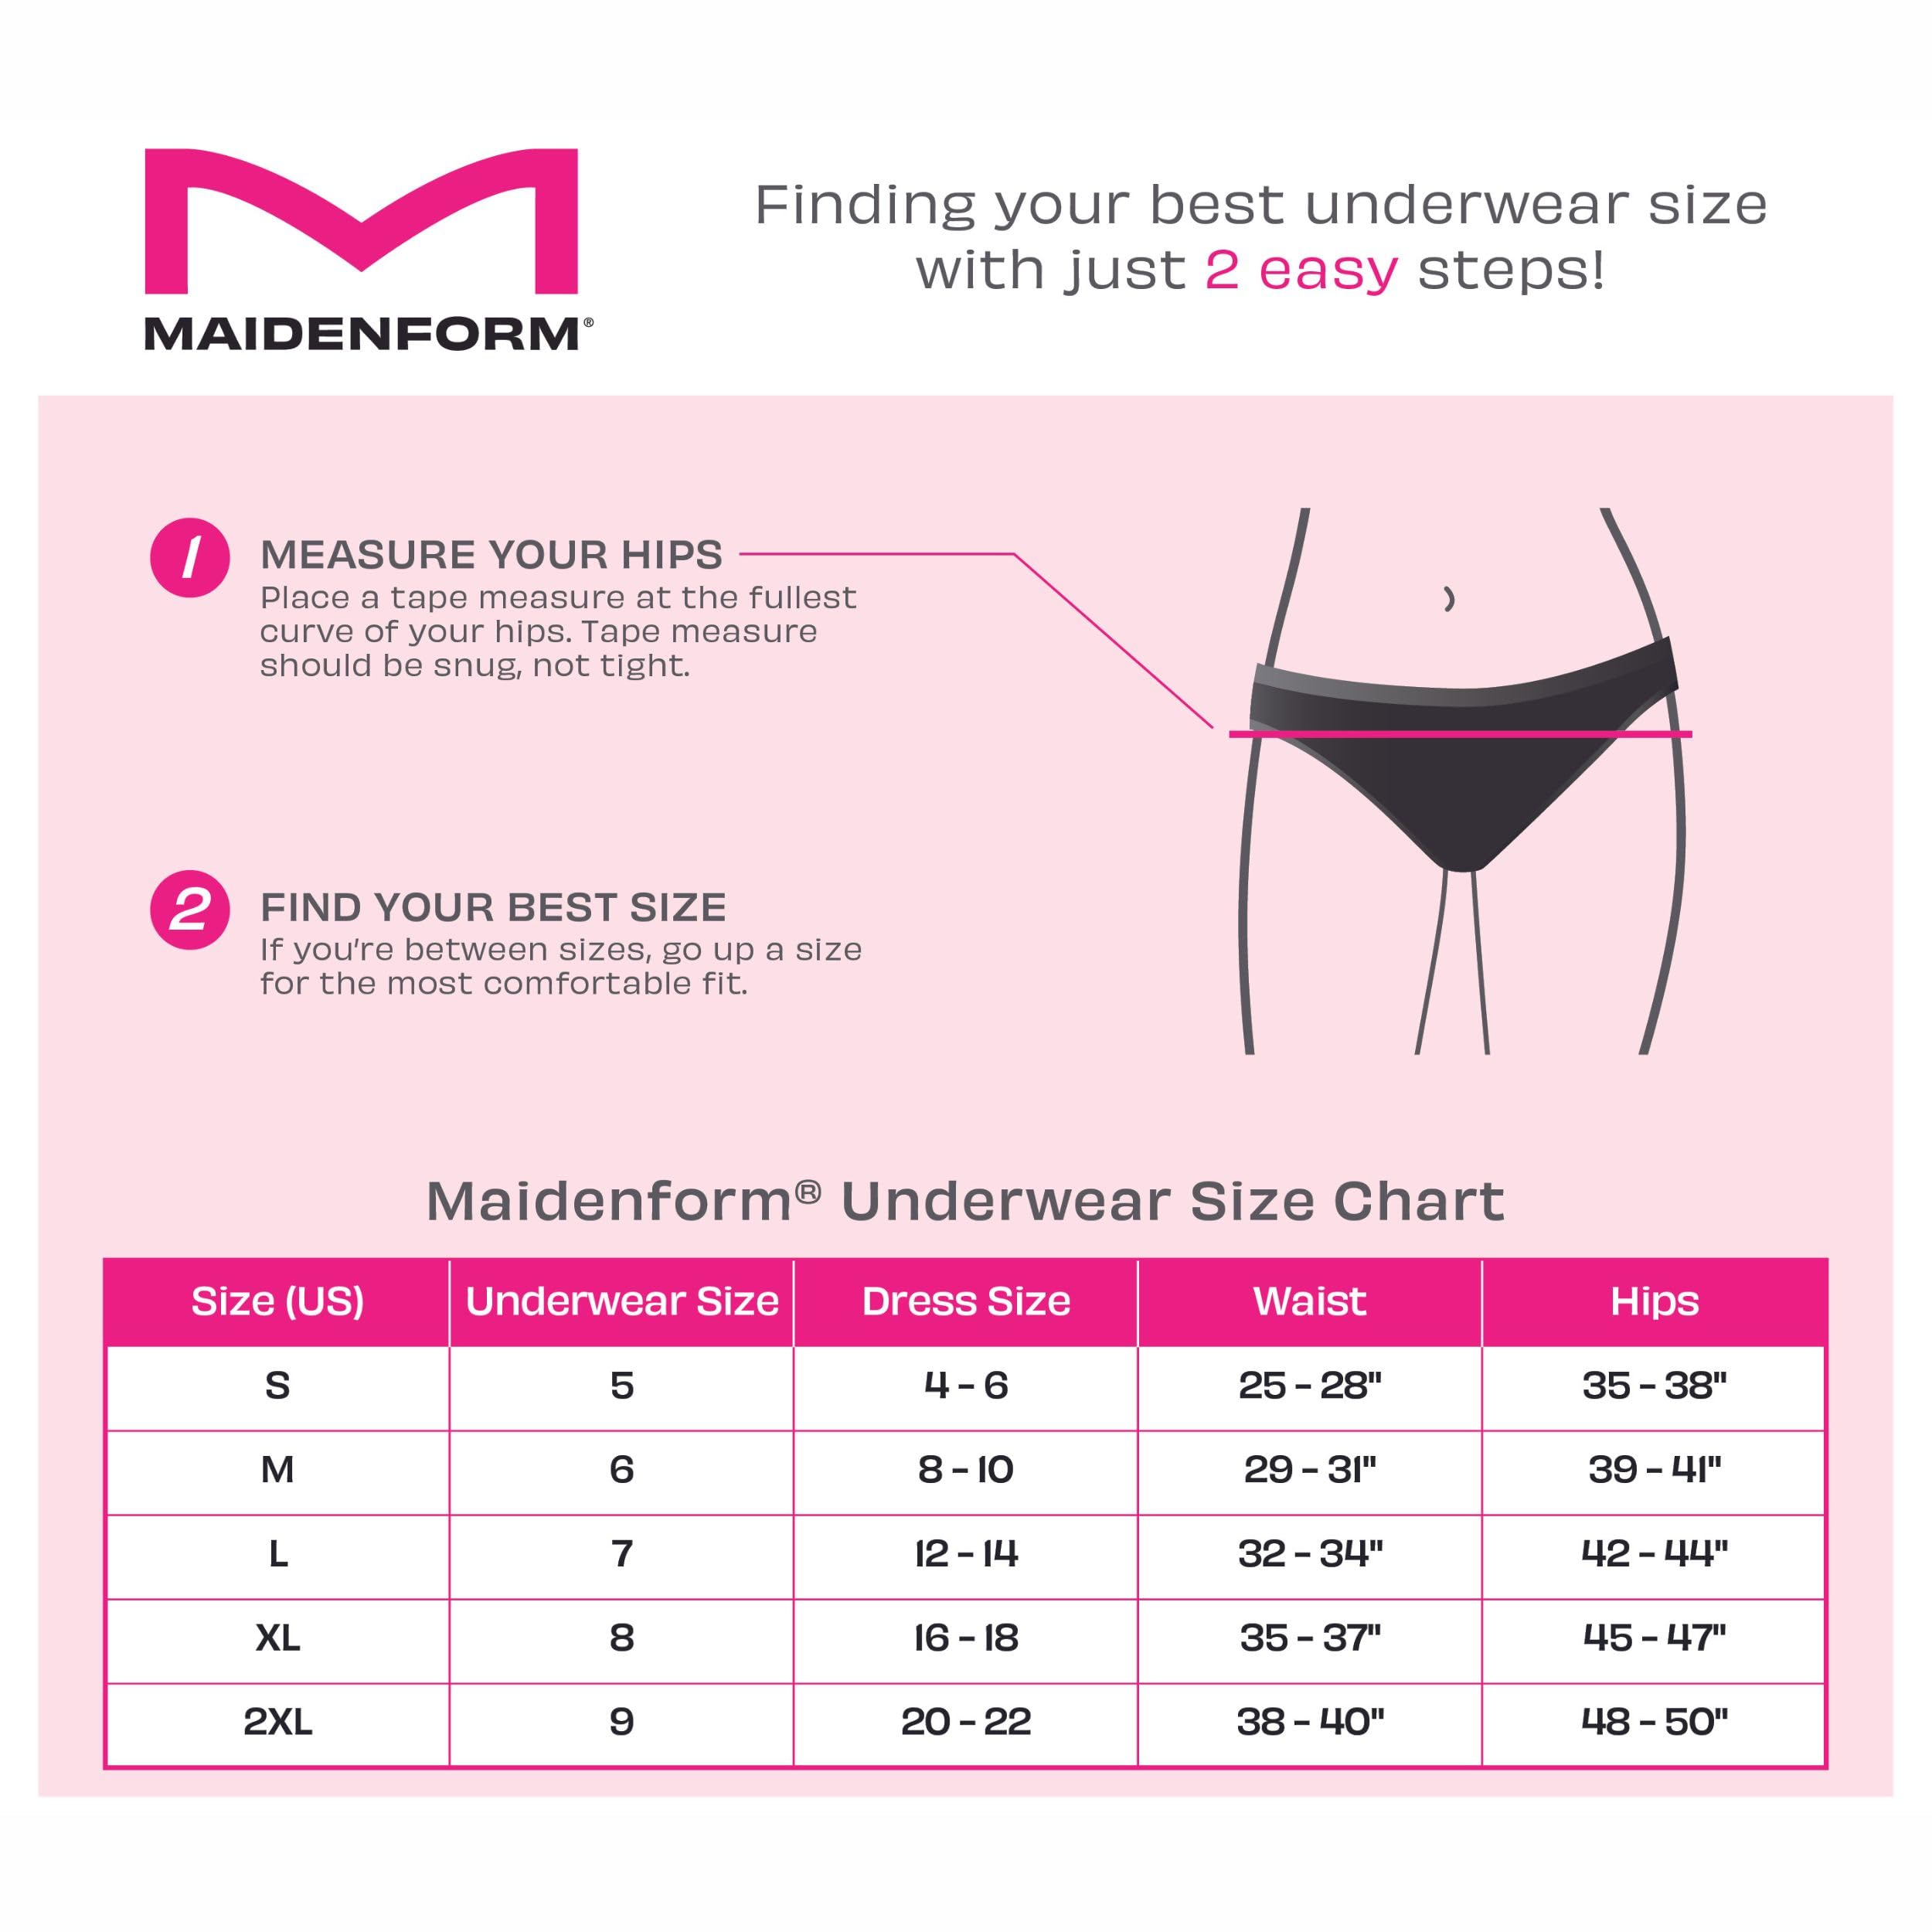 Maidenform Women's Microfiber Boyshort Panty Pack, One Fab Fit Boyshort Panties With Lace, 3-pack